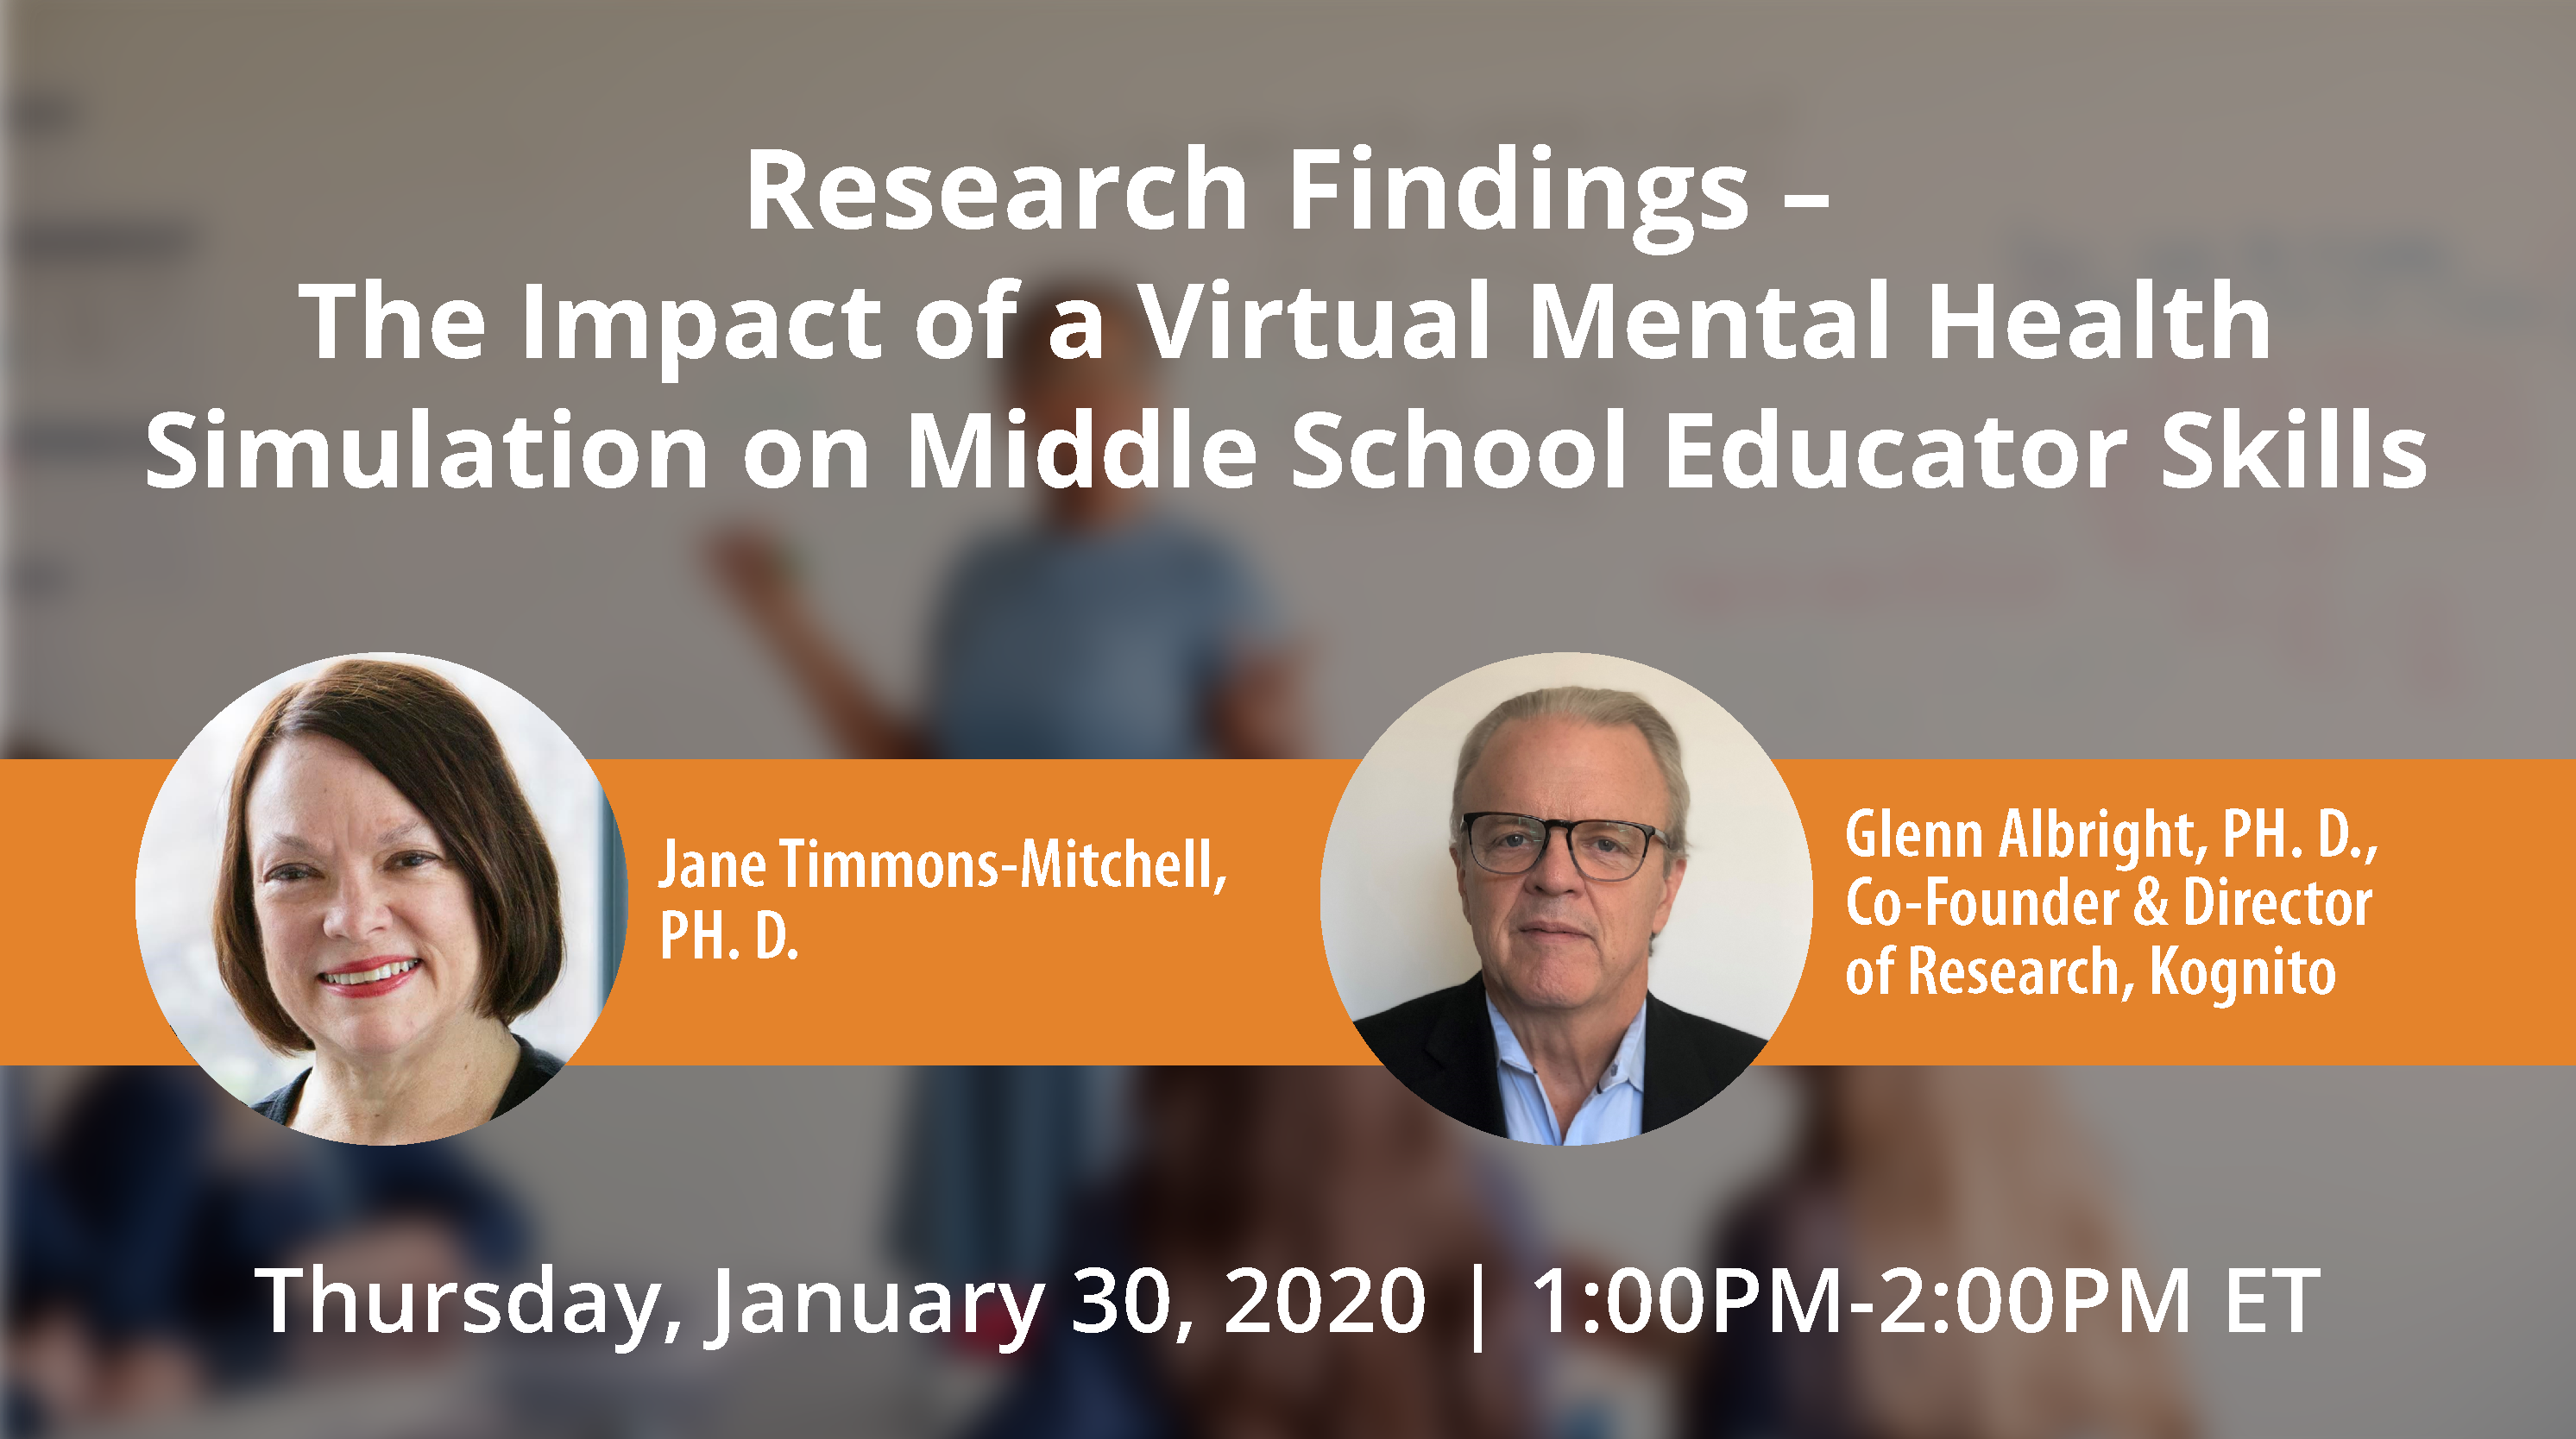 Research Findings – The Impact of a Virtual Mental Health Simulation on Middle School Educator Skills